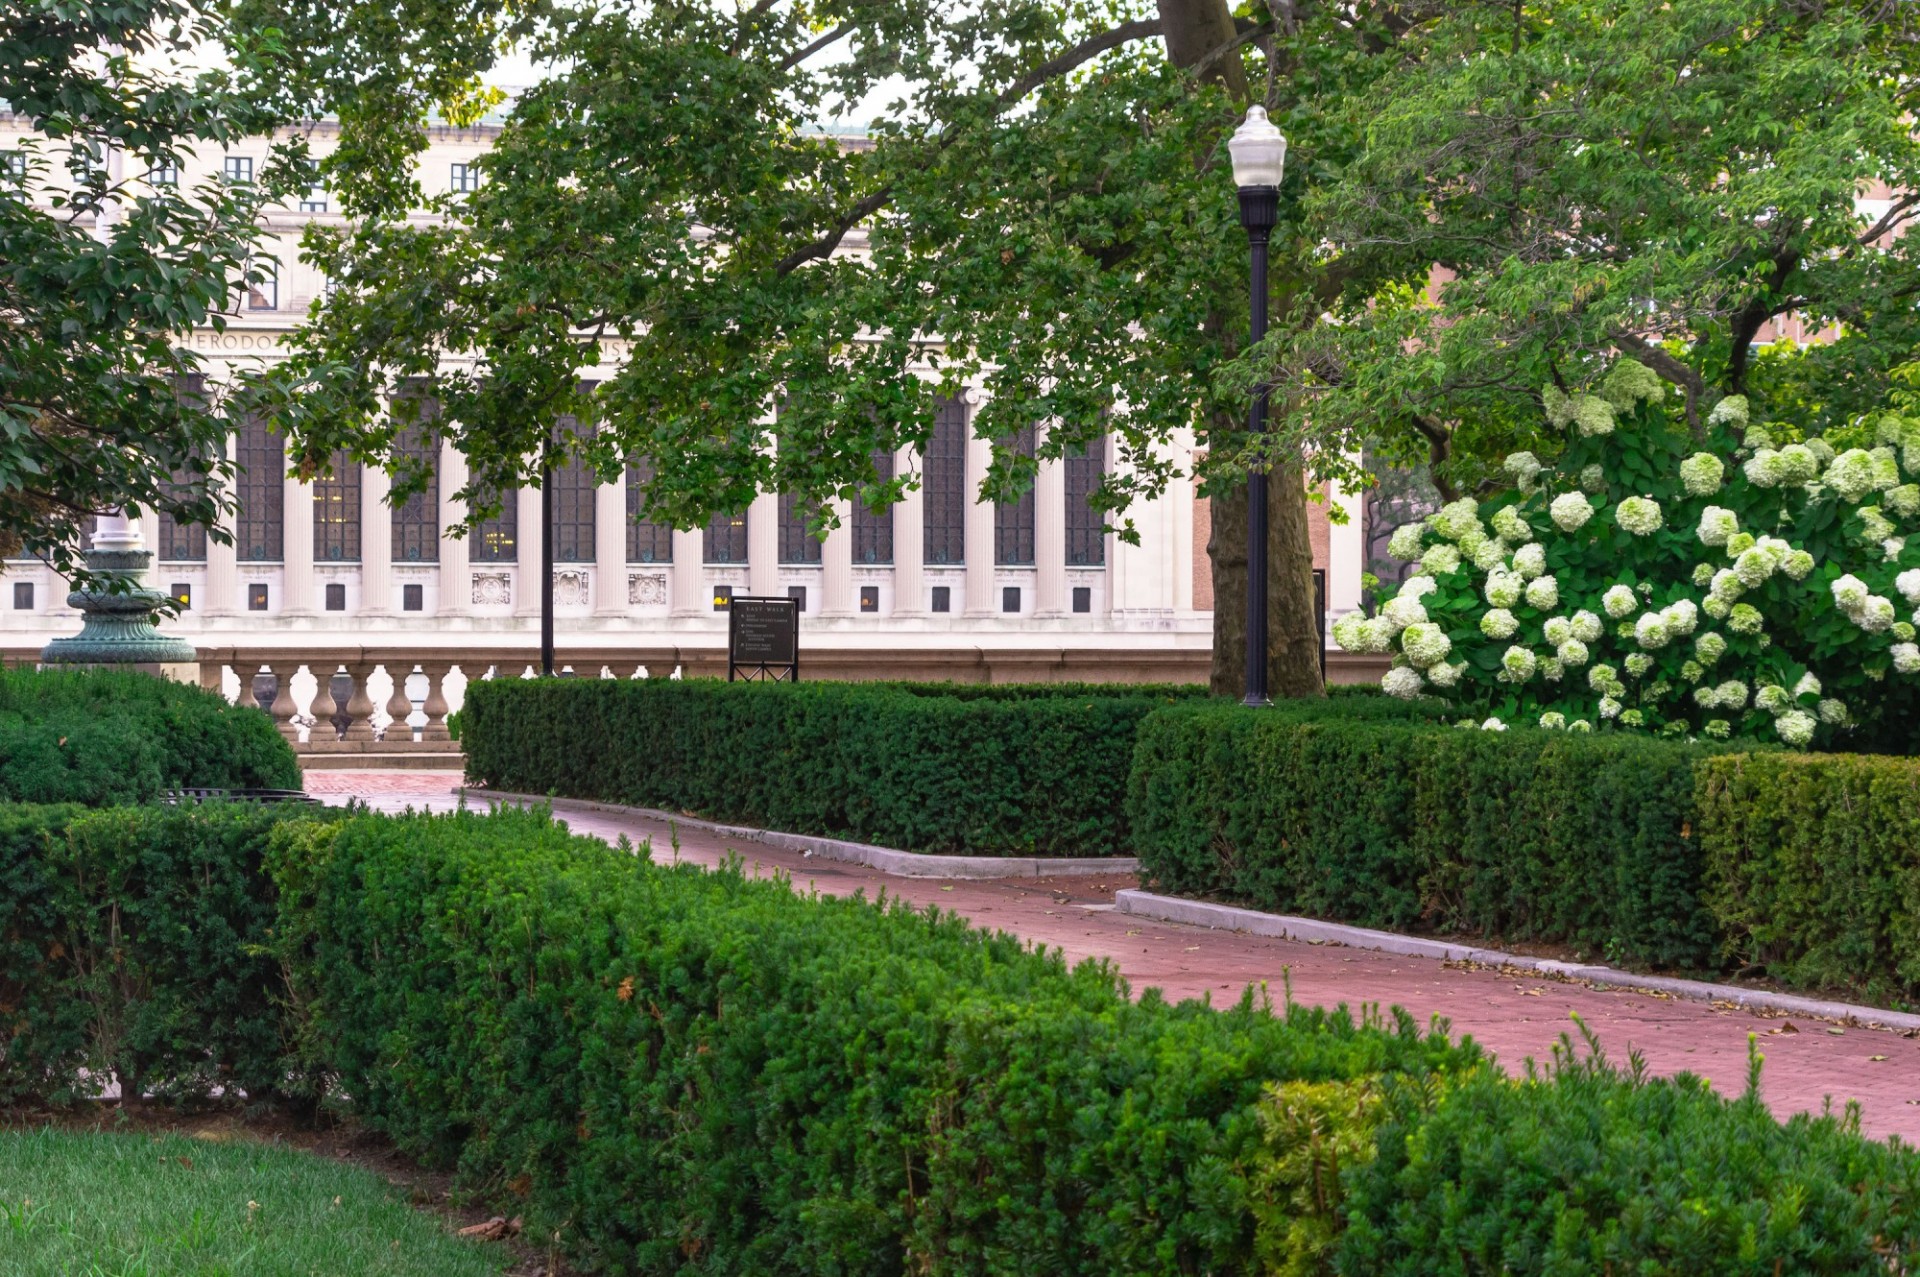 Image of shrubs and pathways on Columbia's upper campus.